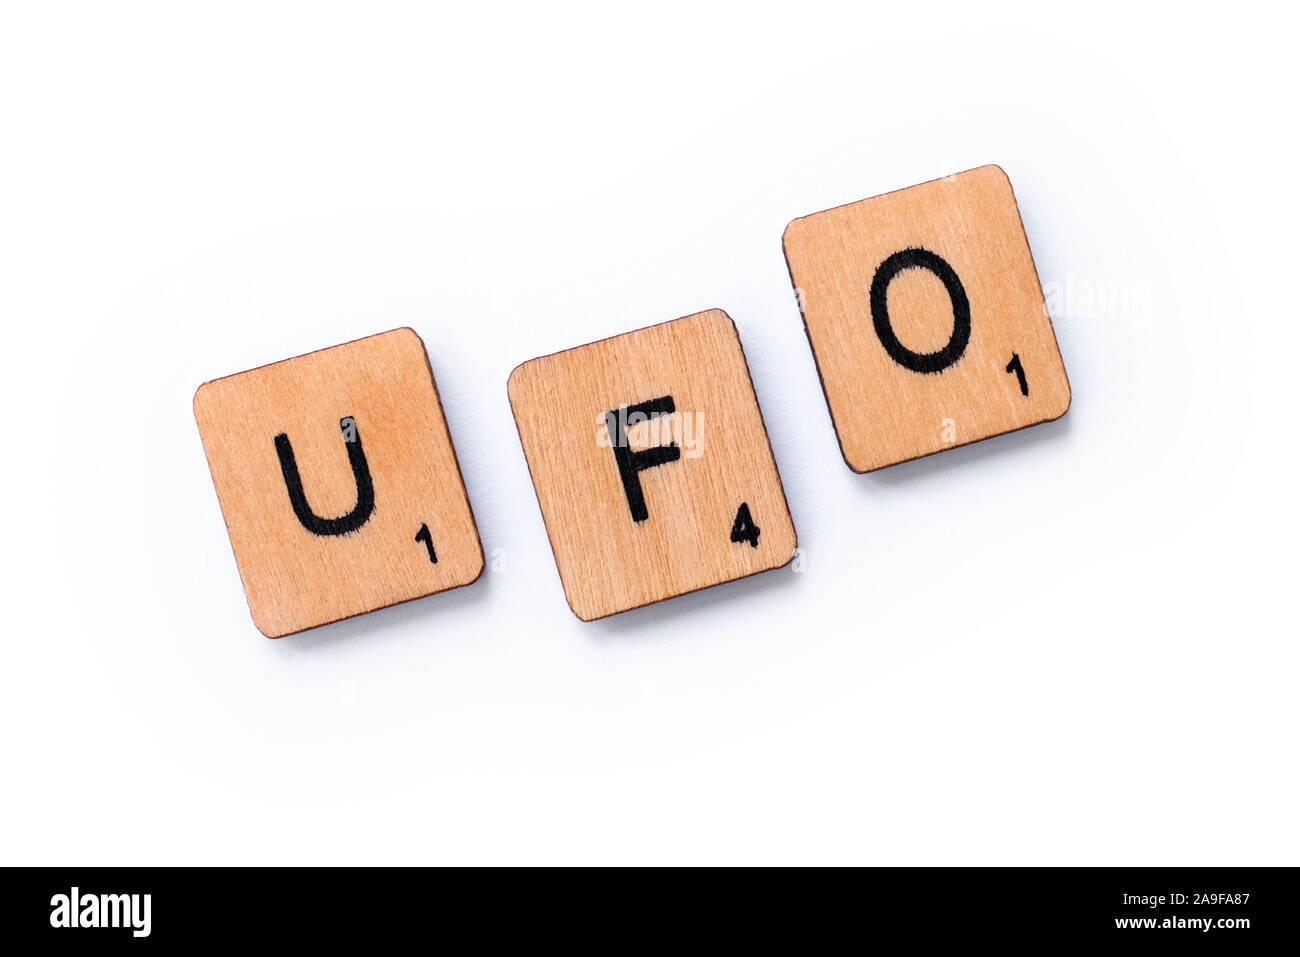 London, UK - June 12th 2019: The abbreviation UFO which stands for Unidentified Flying Object, spelt with wooden letter tiles over a white background. Stock Photo